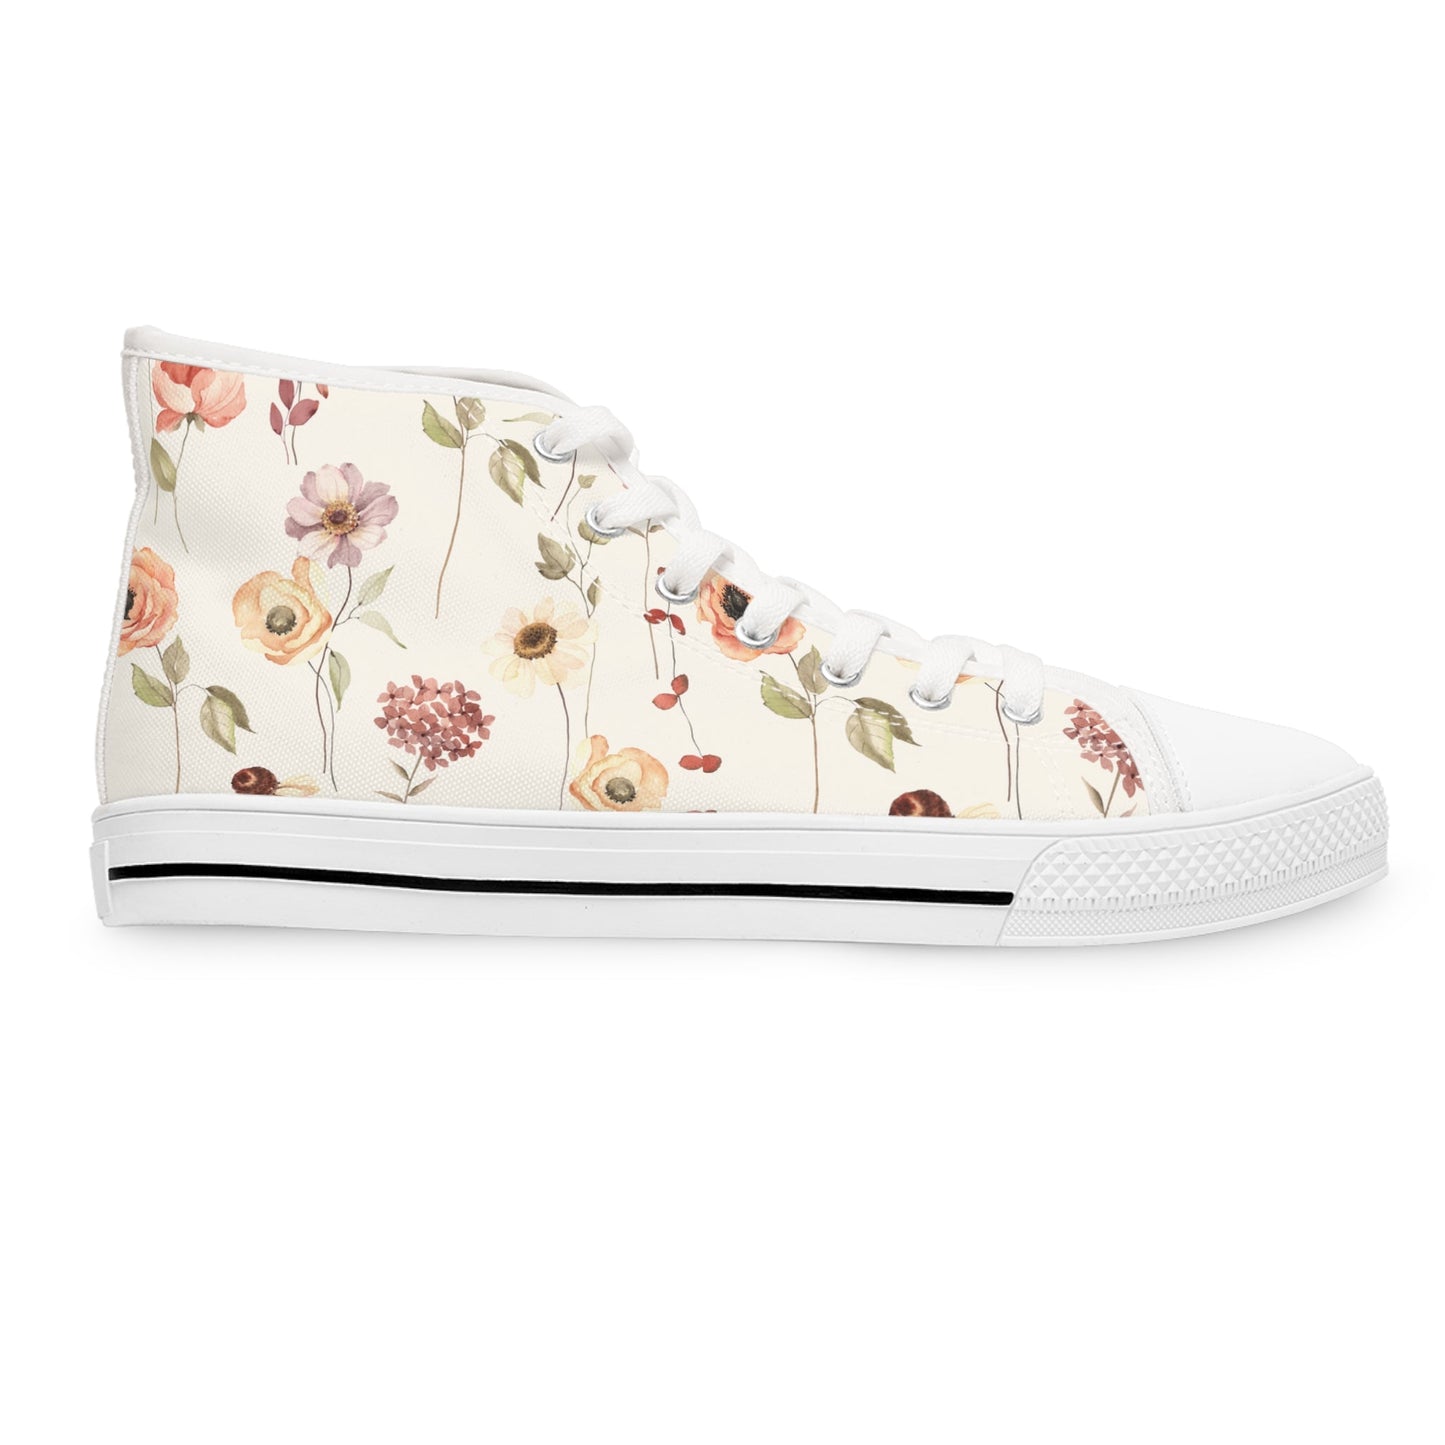 Shoes - Women's Summer High Top Sneakers